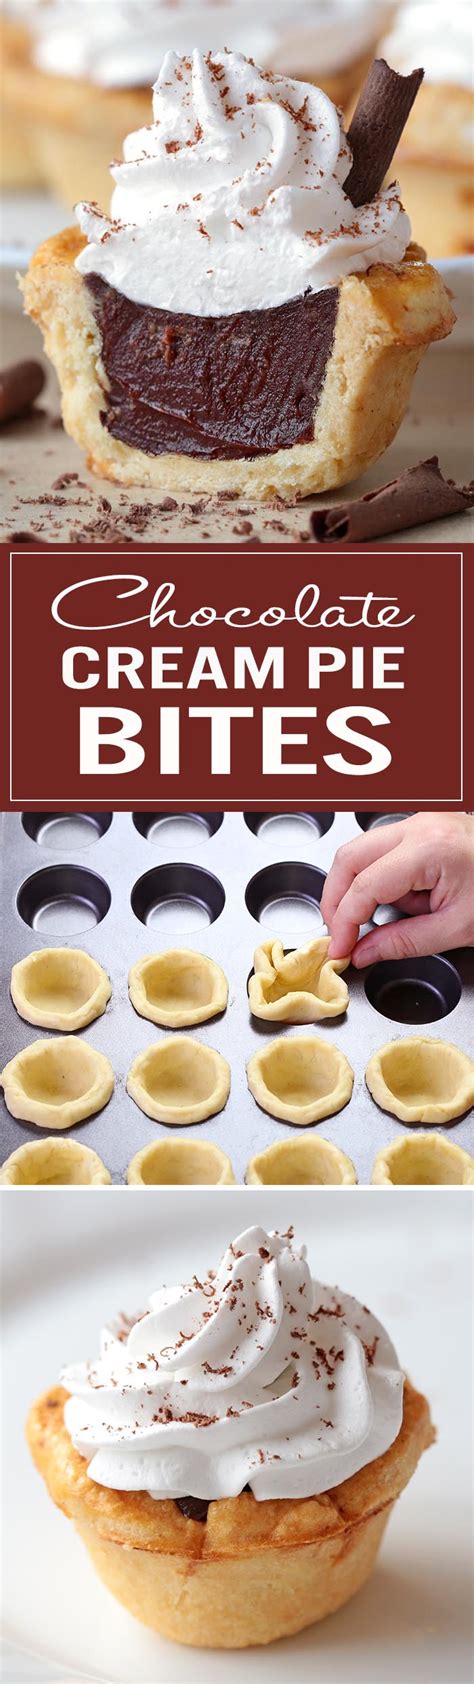 Pulse until the cookies are finely crushed. Chocolate Cream Pie Bites - Sugar Apron